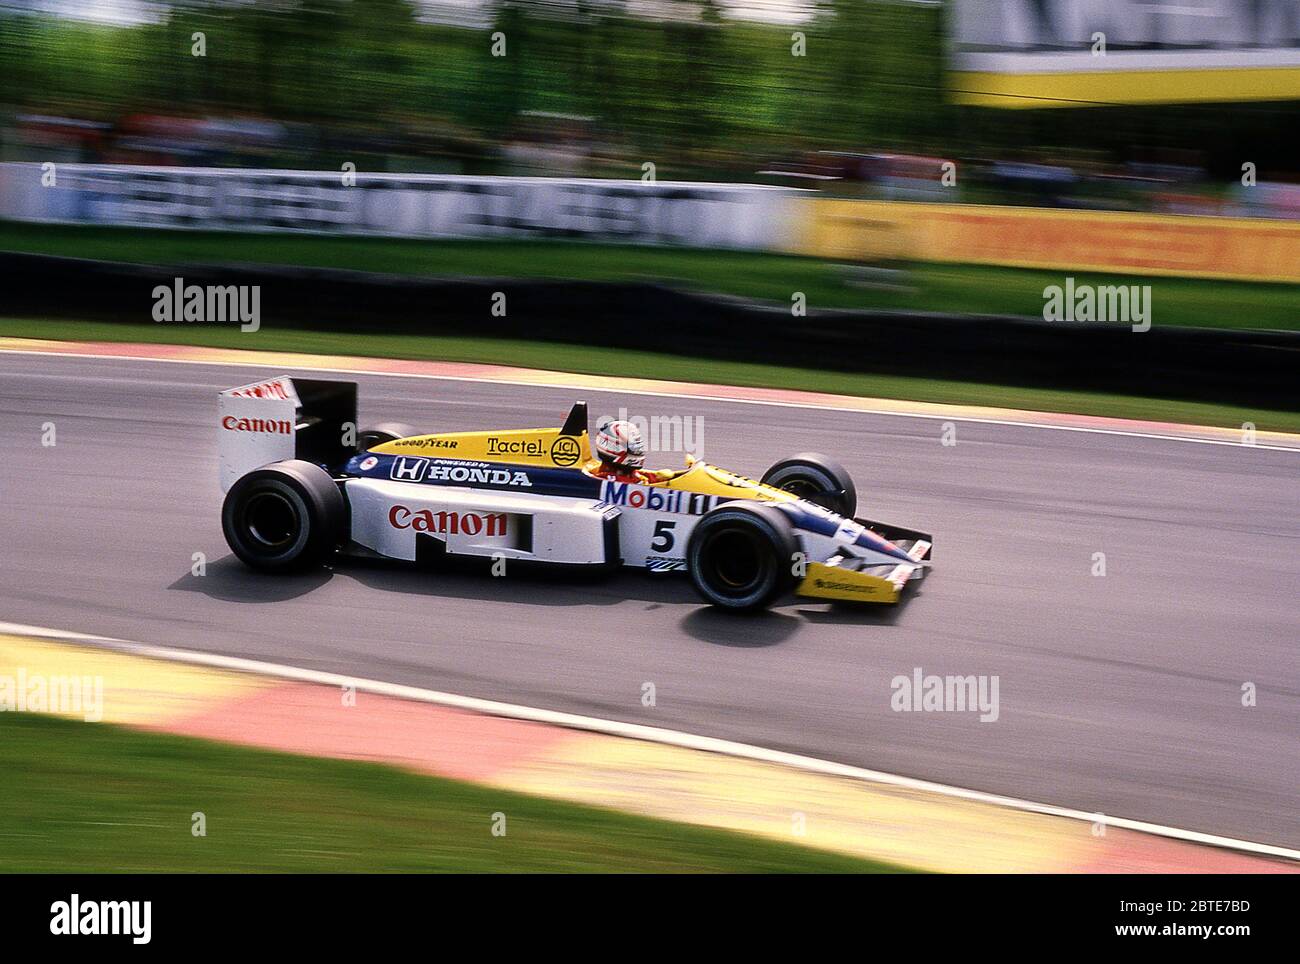 Nigel Mansell in his Williams F1 car at the 1986 British Grand Prix at Brands Hatch UK Stock Photo